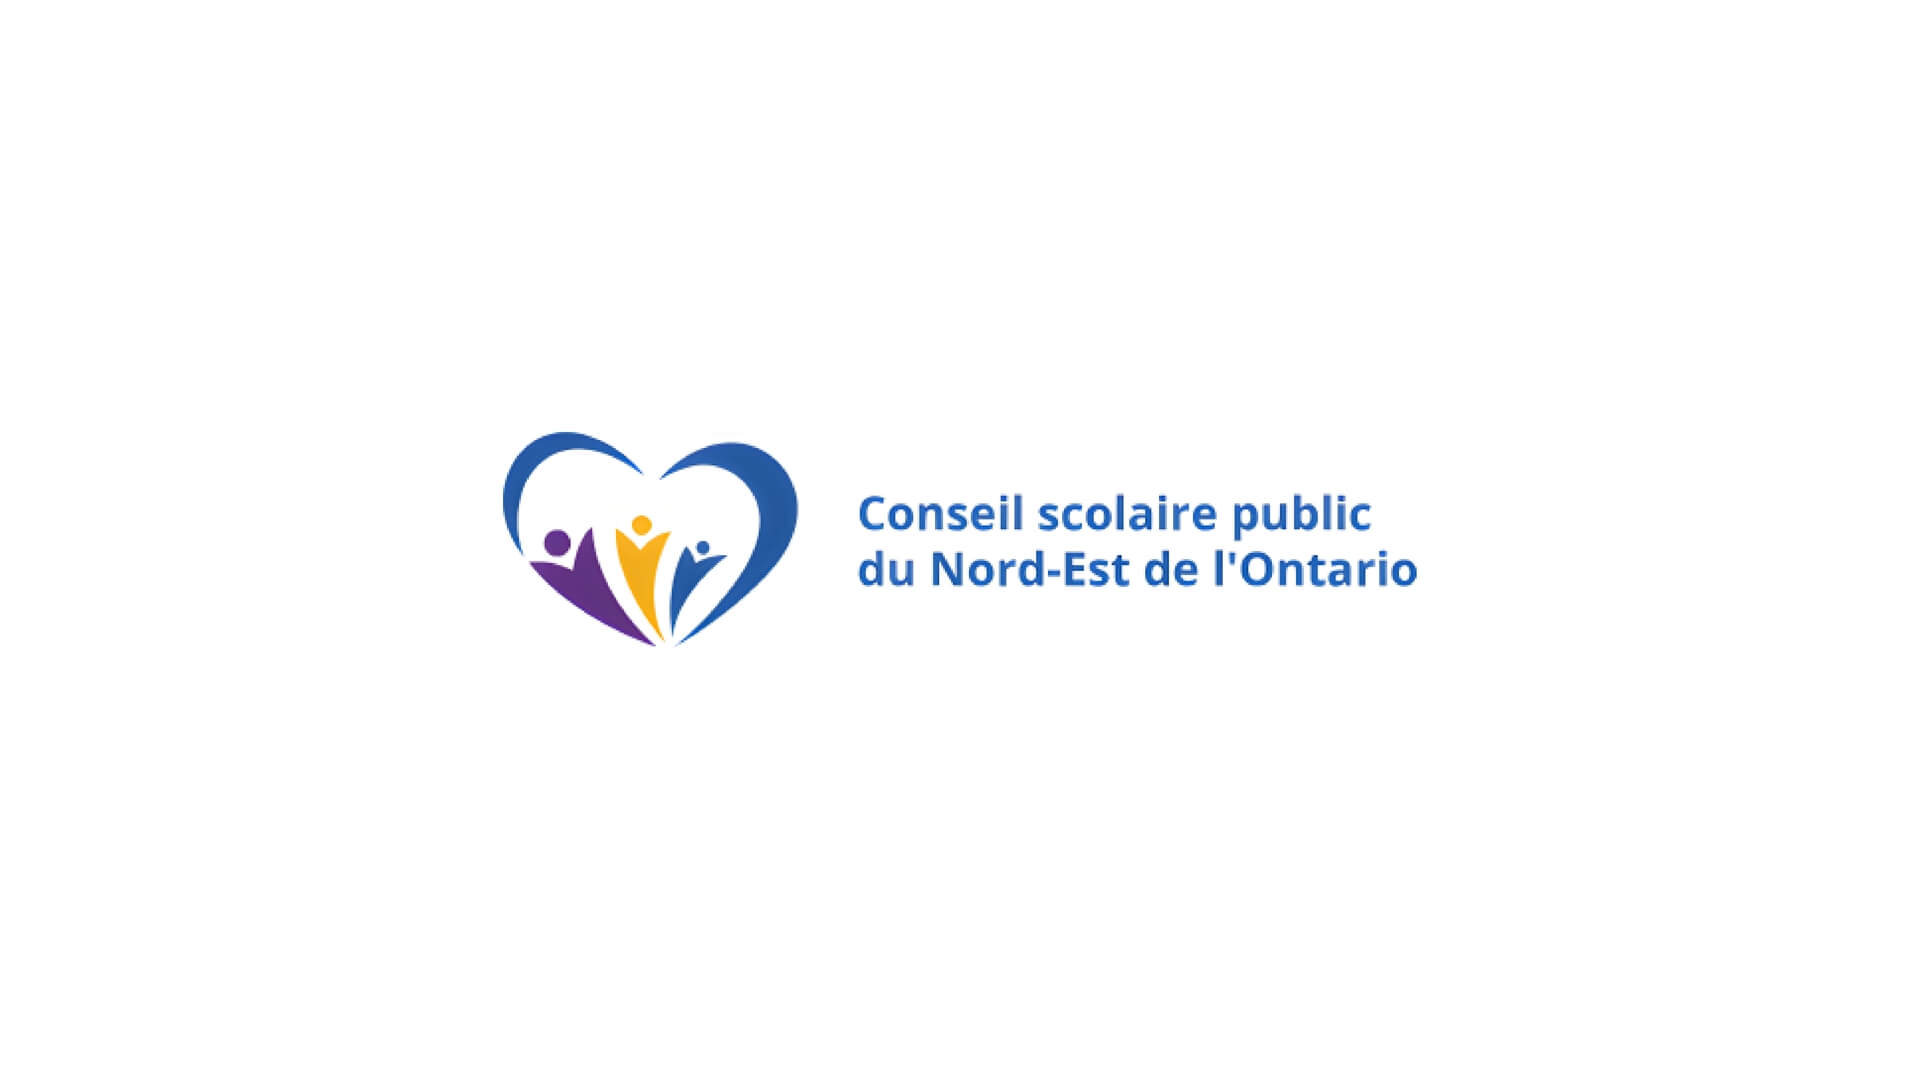 Timmins Care Logo of the conseil scolaire public du nord-est de l'ontario, featuring a stylized heart with abstract human figures in blue, yellow, and purple. Cochrane District Social Services Administration Board